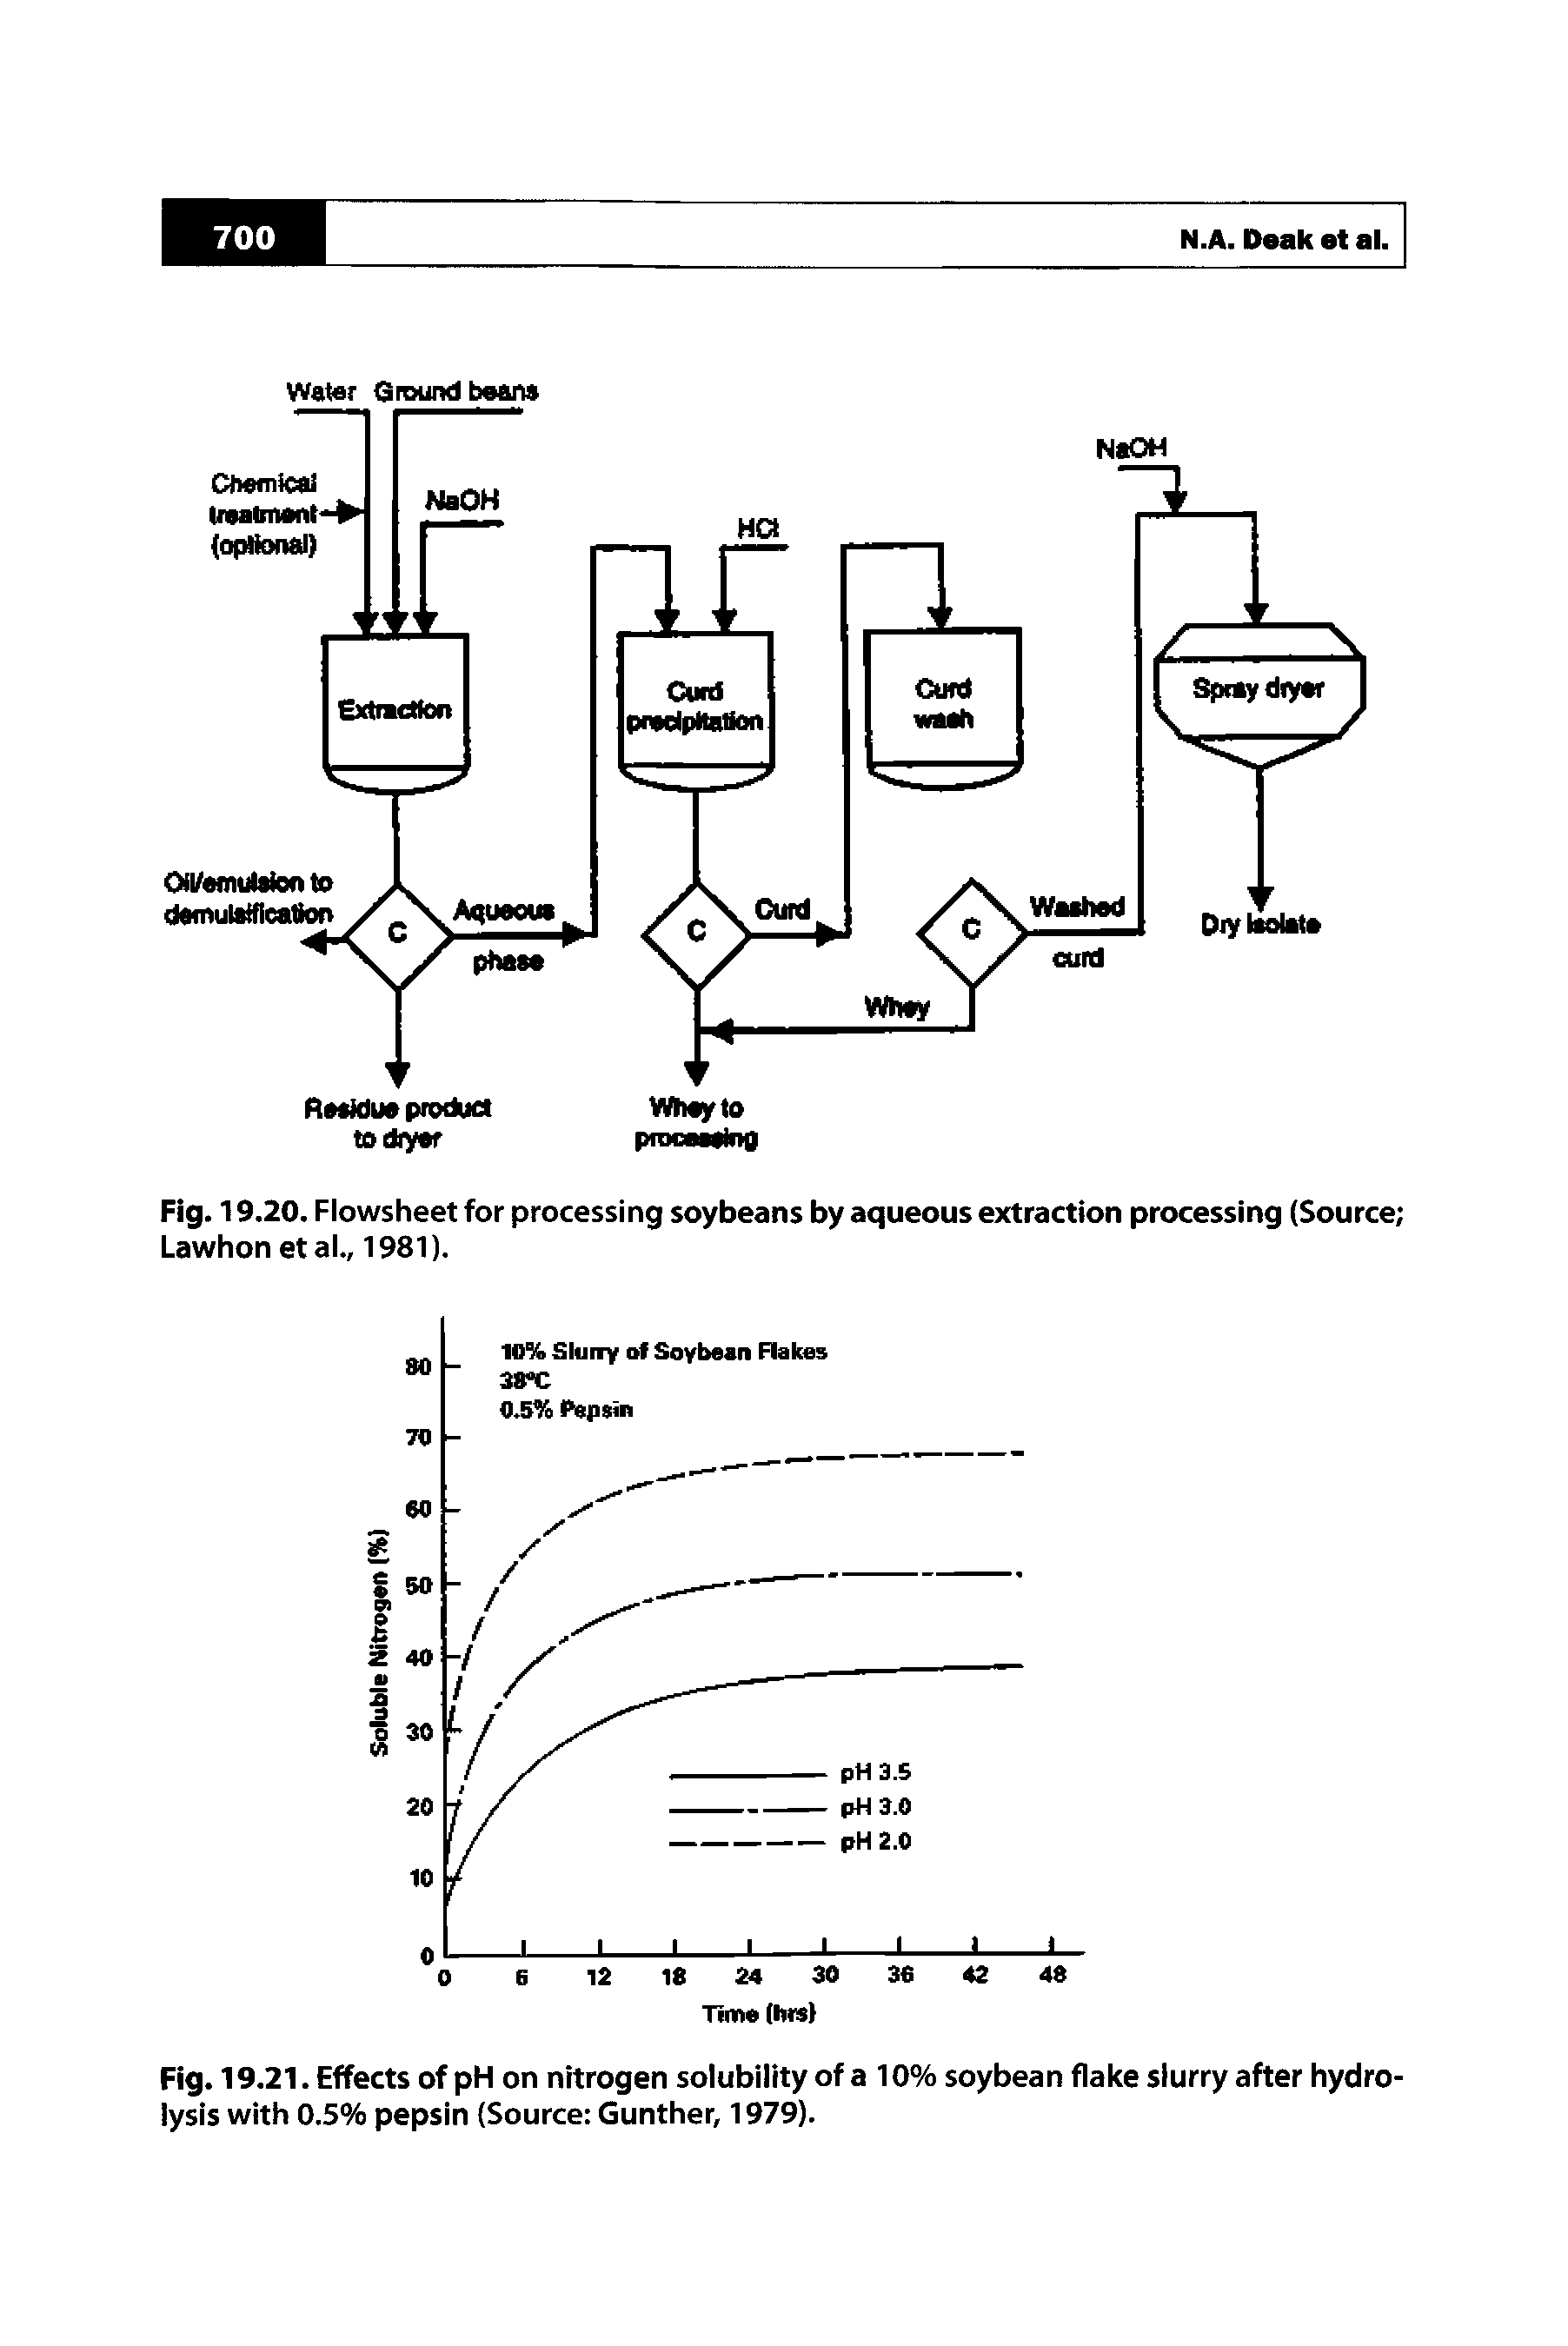 Fig. 19.20. Flowsheet for processing soybeans by aqueous extraction processing (Source Lawhon etal., 1981).